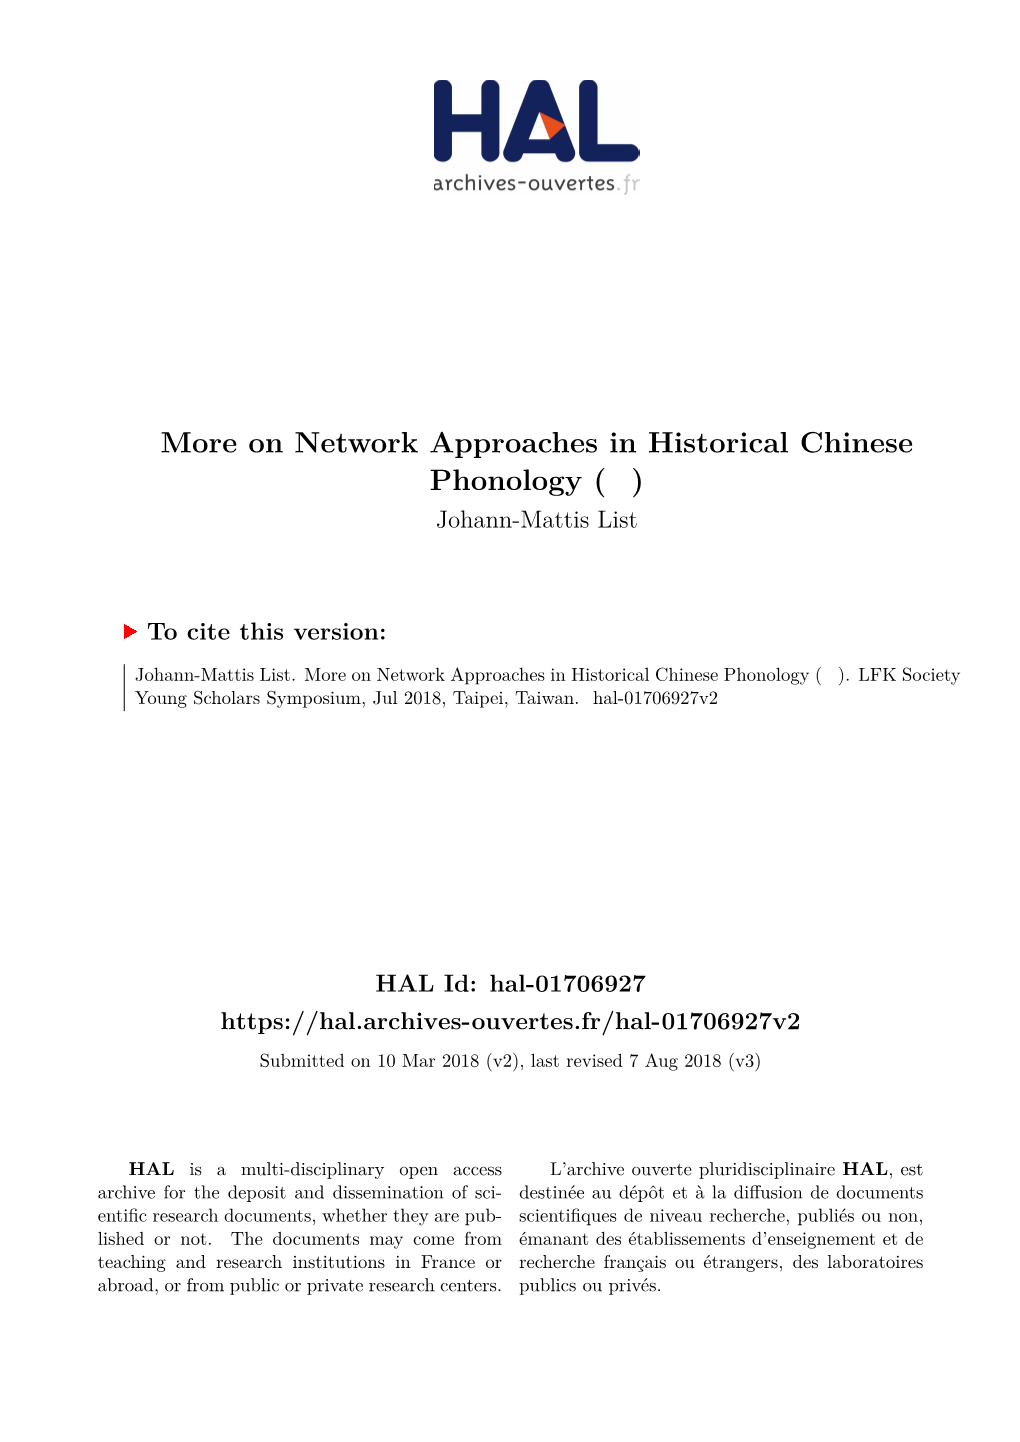 More on Network Approaches in Historical Chinese Phonology (音韻學)